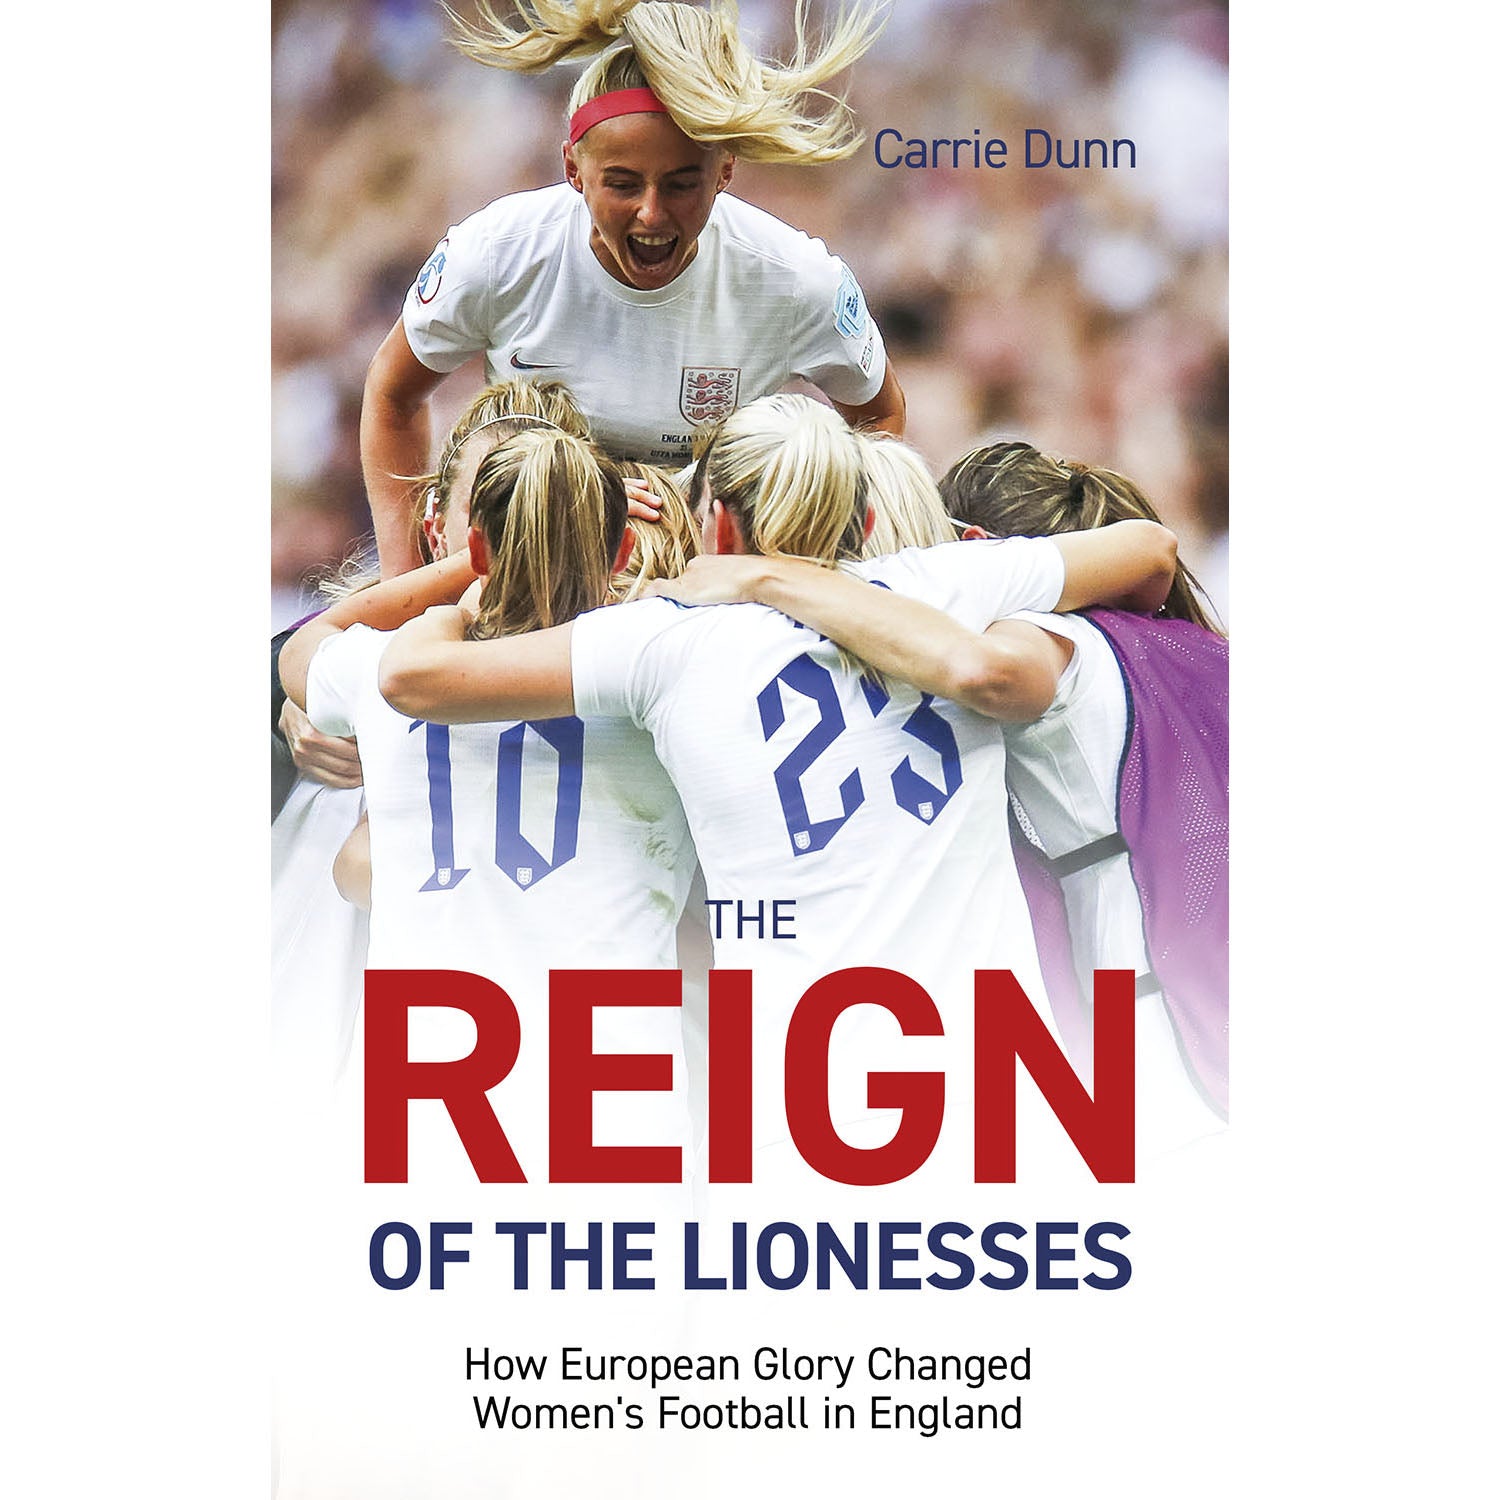 The Reign of the Lionesses – How European Glory Changed Women's Football in England